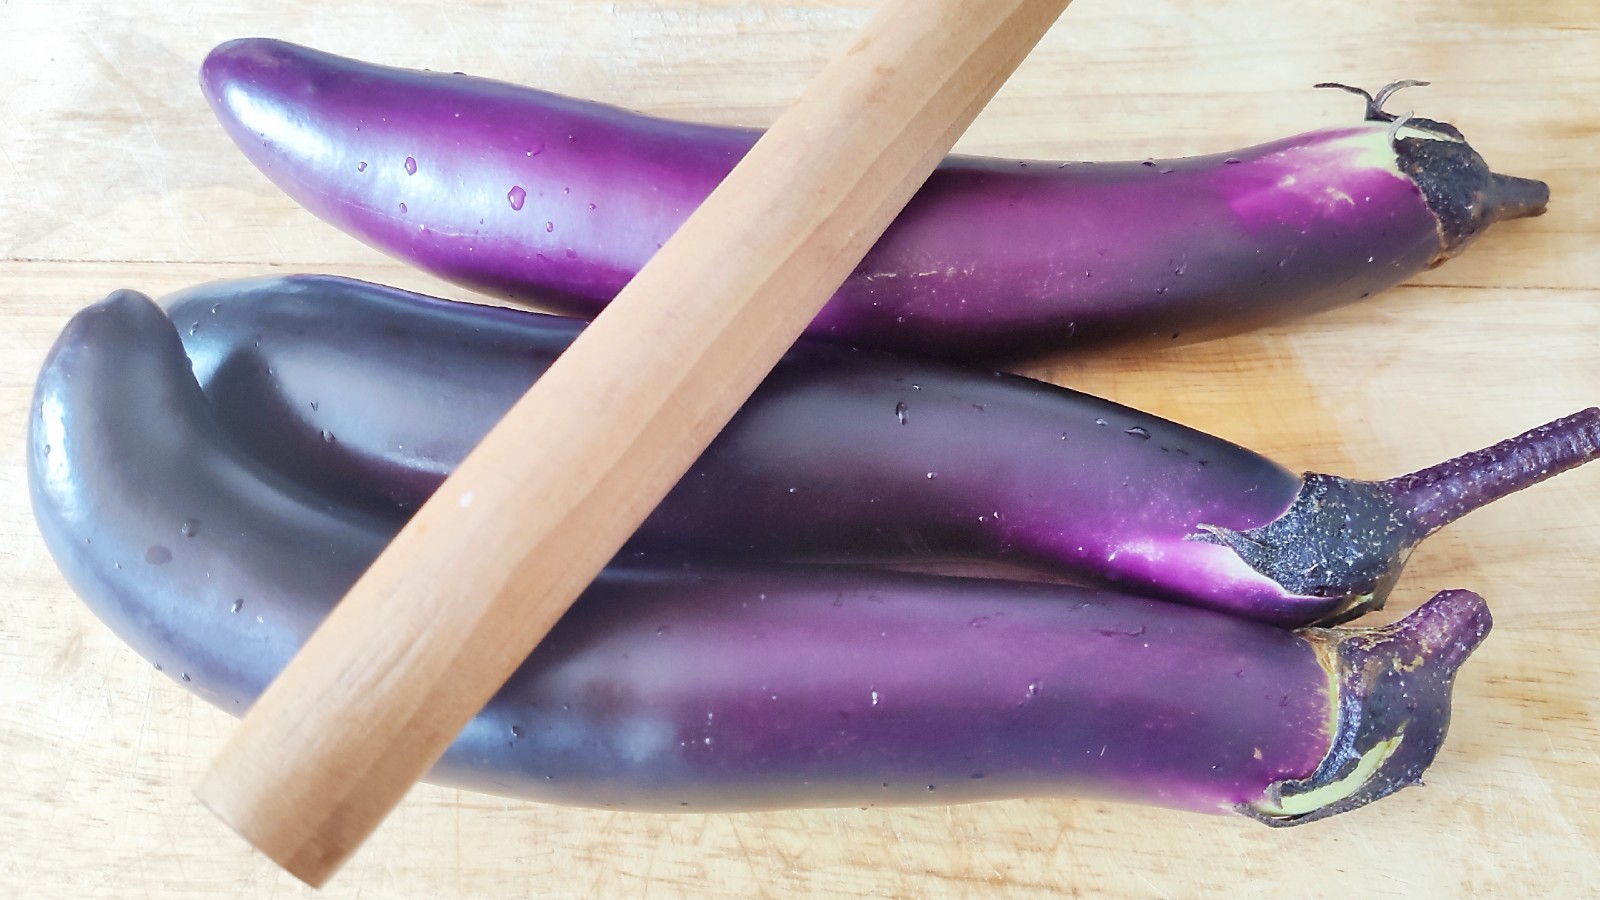 My eggplant never fried to eat, rolling pin a knock, more fragrant than meat, table was robbed.